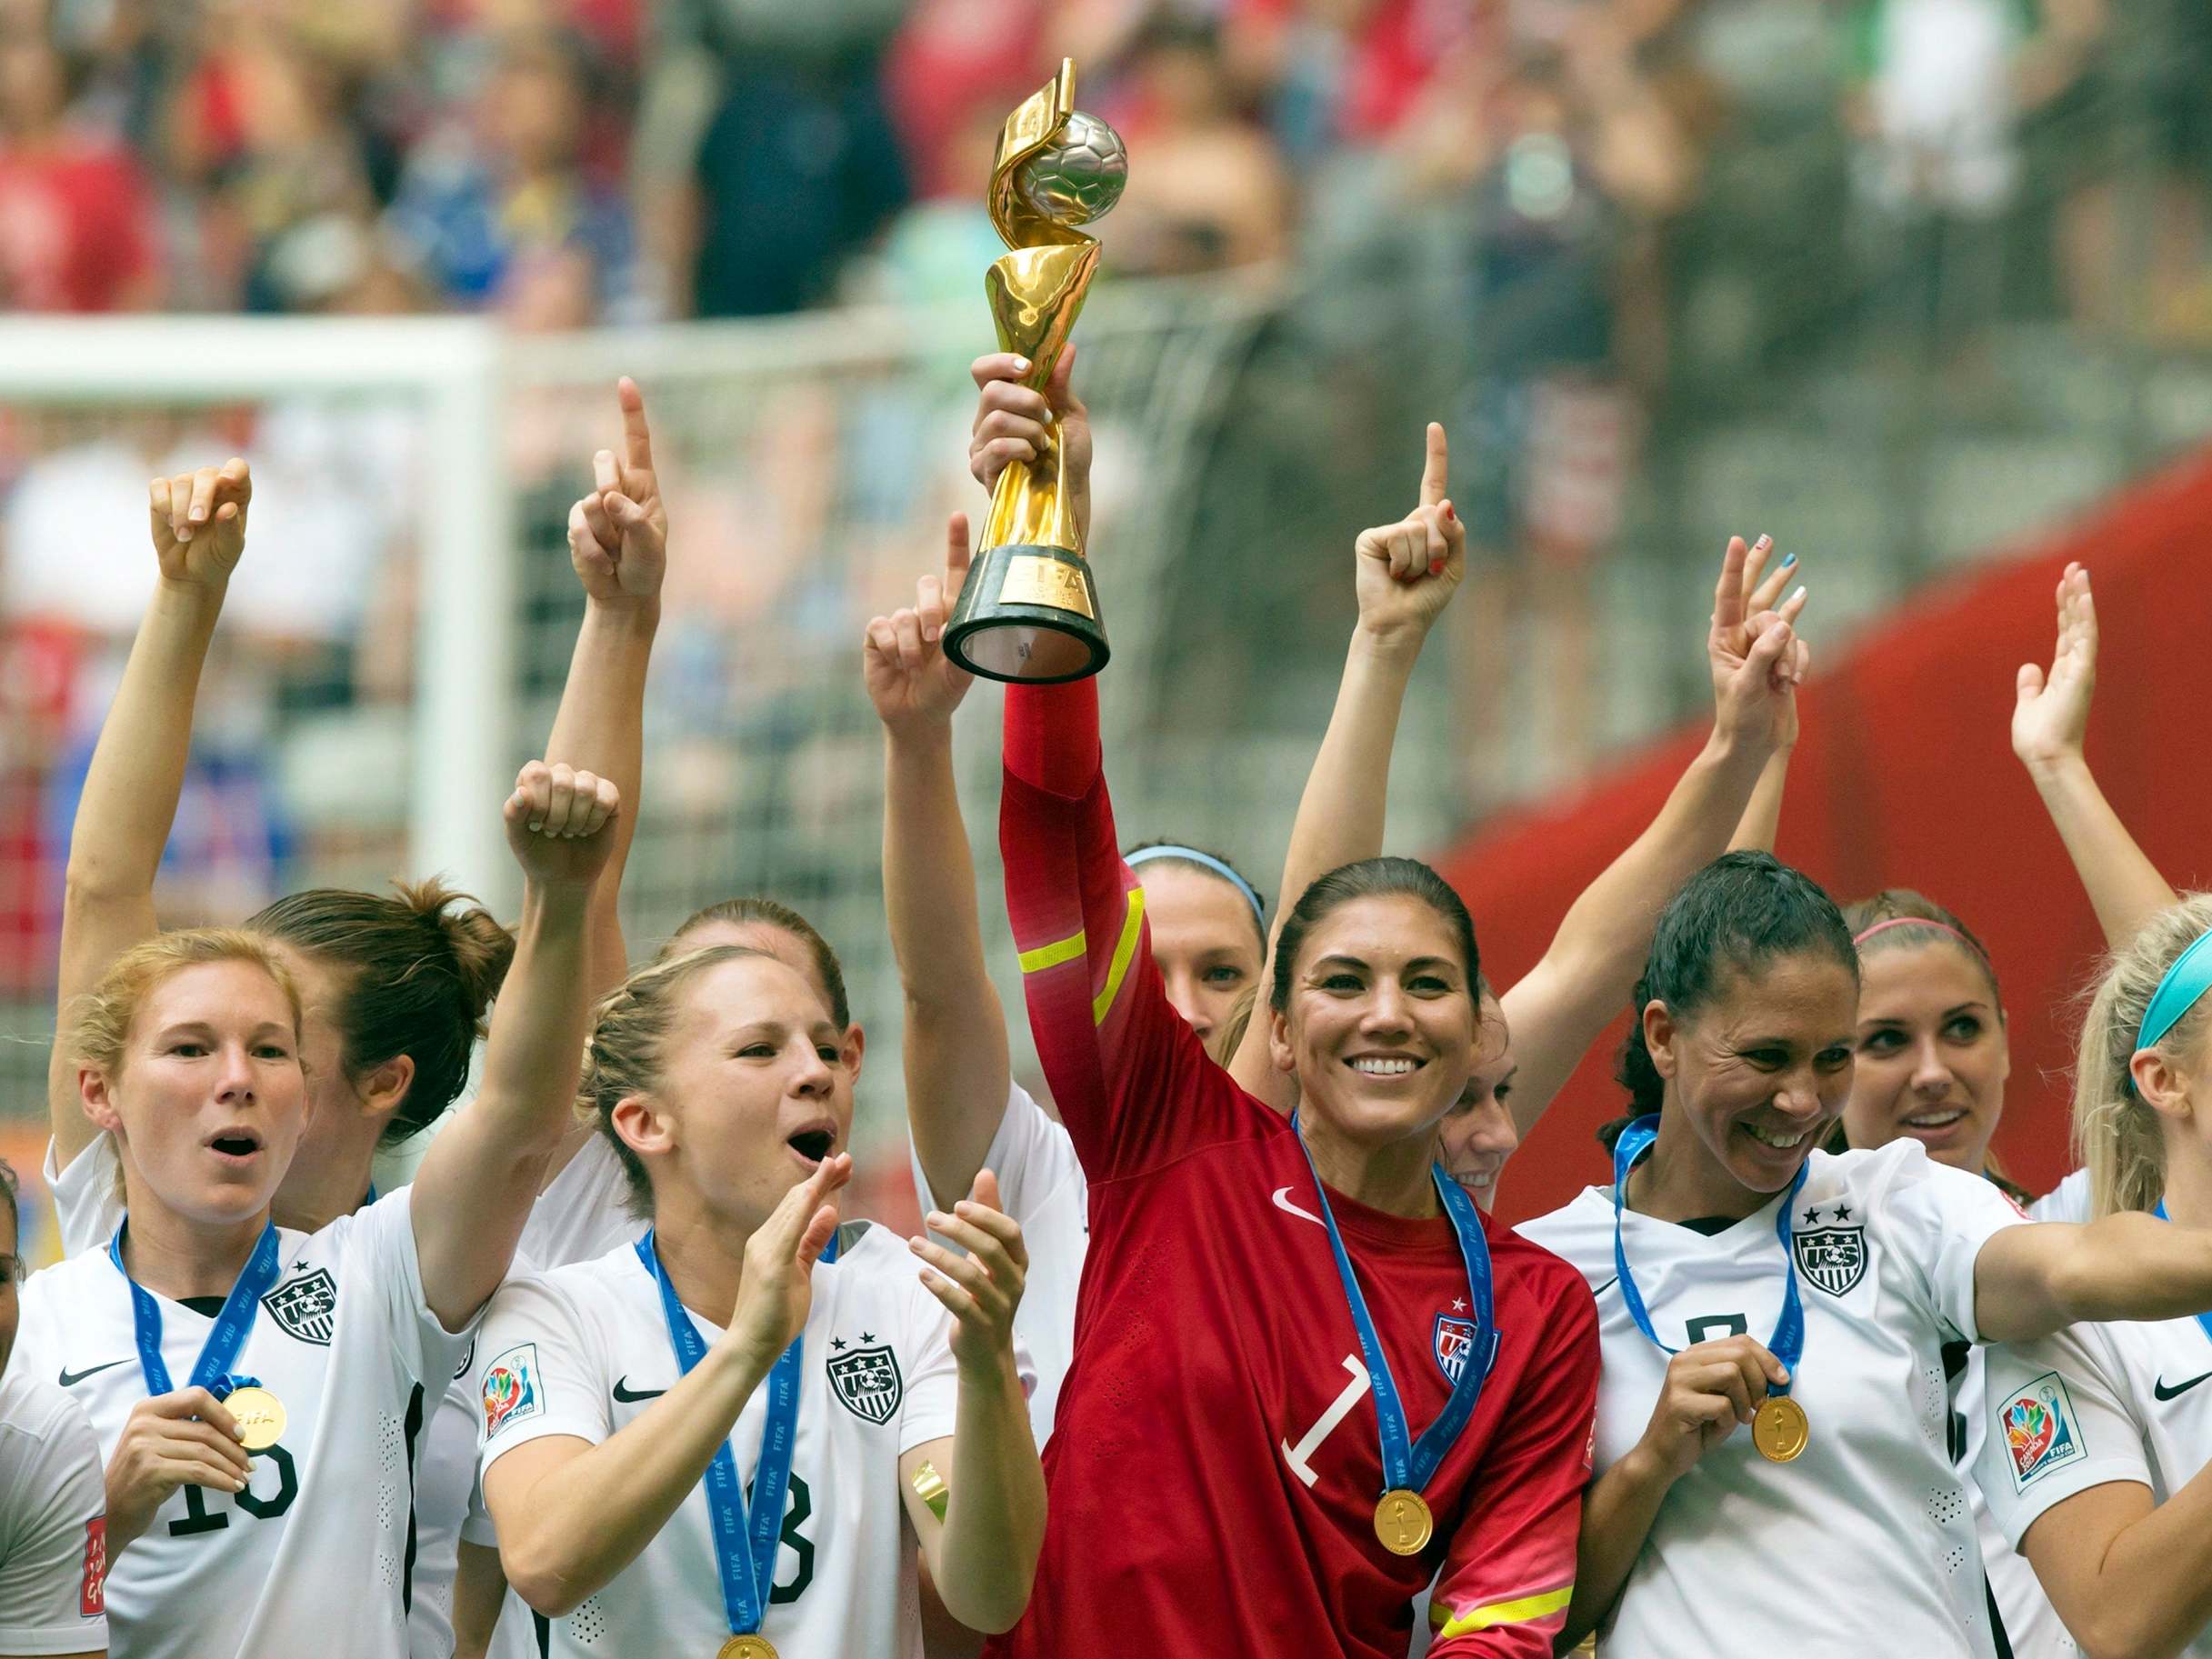 Hope Solo lifts the trophy at the 2015 Women’s World Cup as the US team takes victory